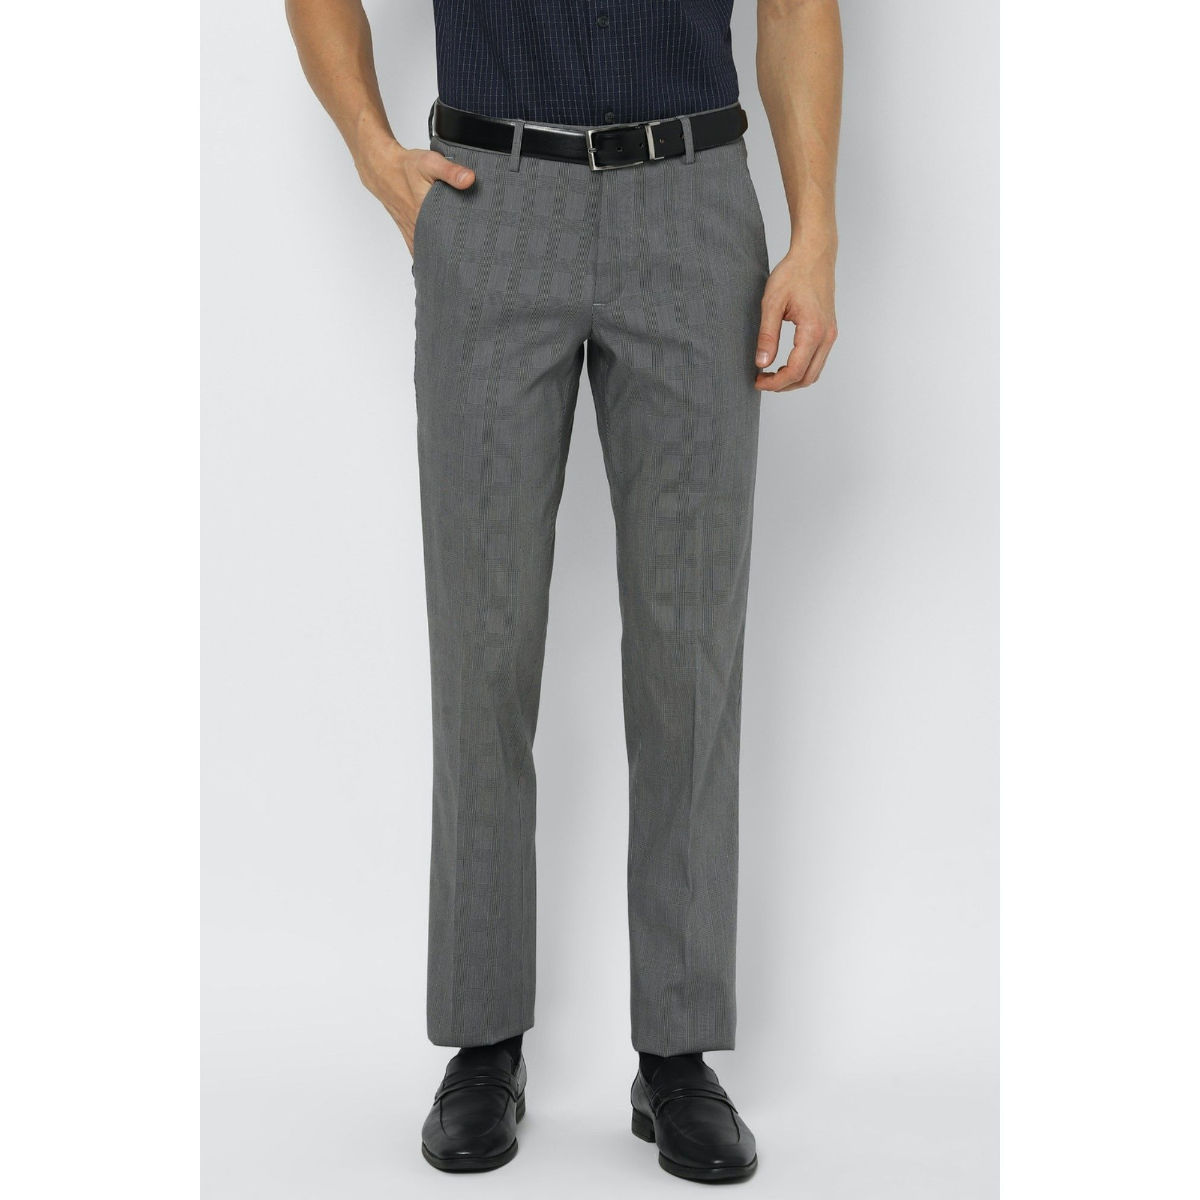 Buy LOUIS PHILIPPE SPORTS Mens Super Slim Fit Solid Trousers  Shoppers Stop